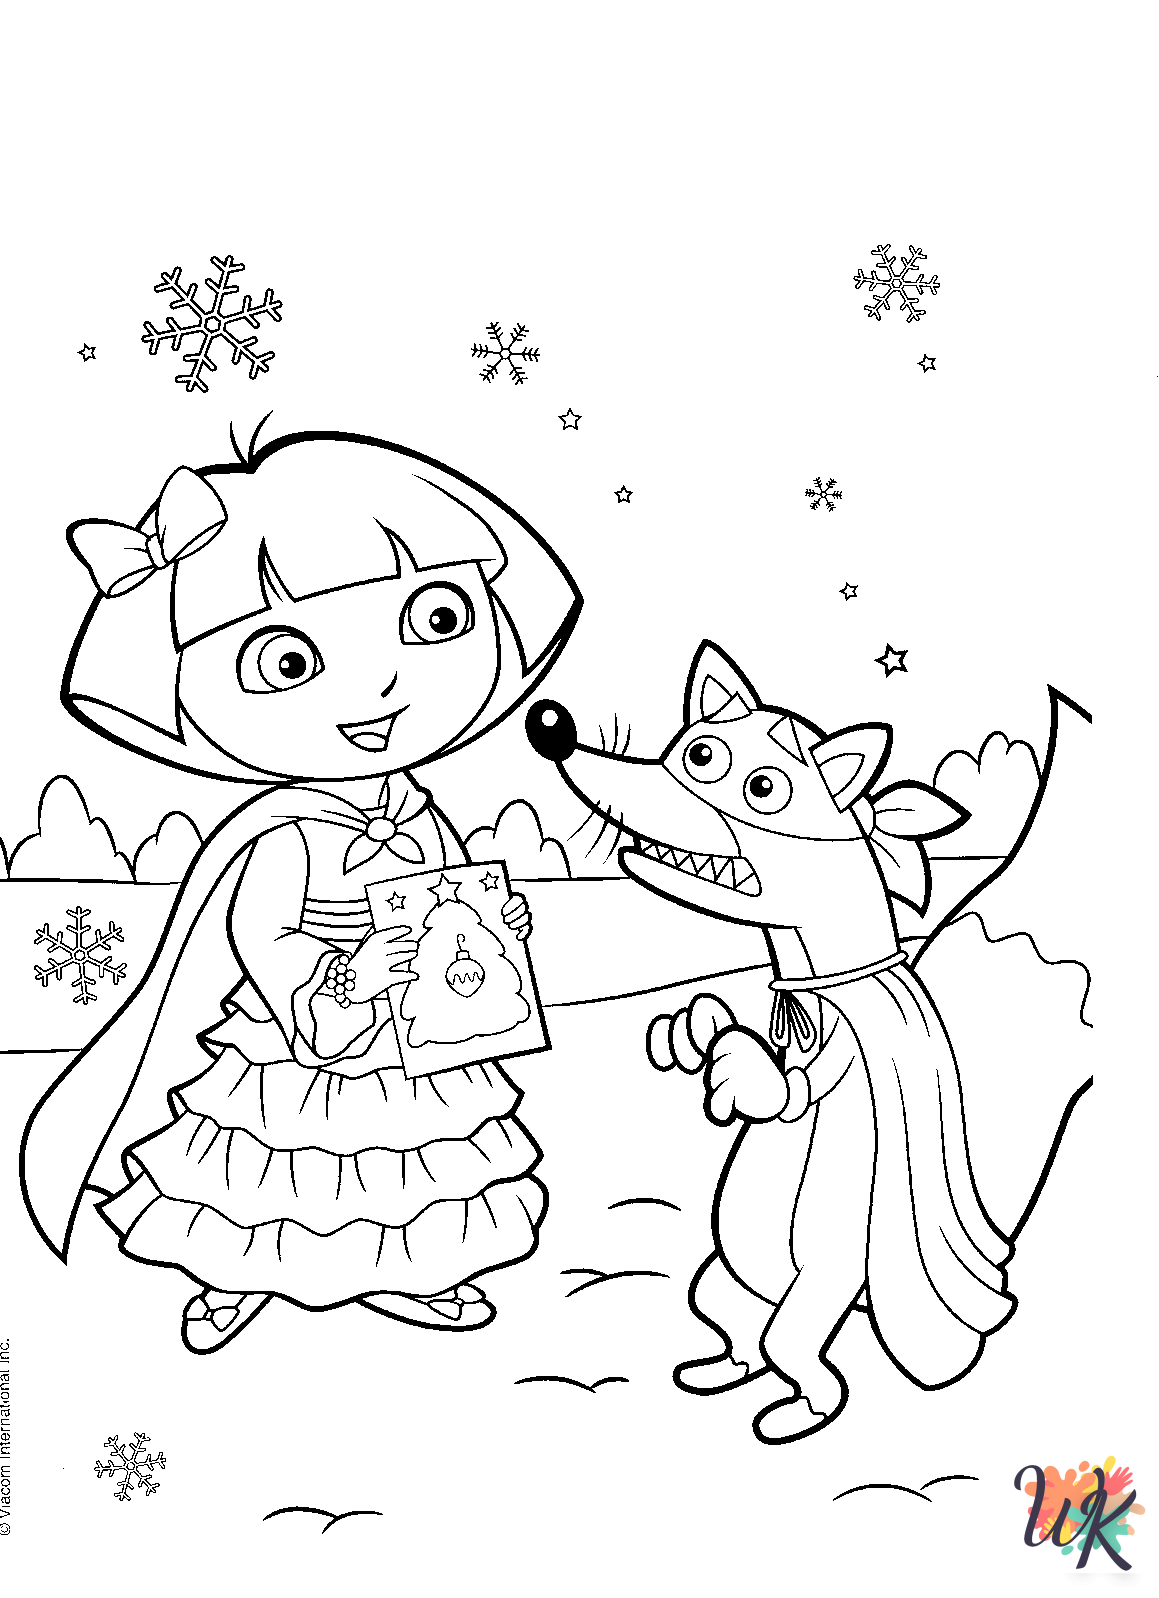 Dora Christmas ornaments coloring pages